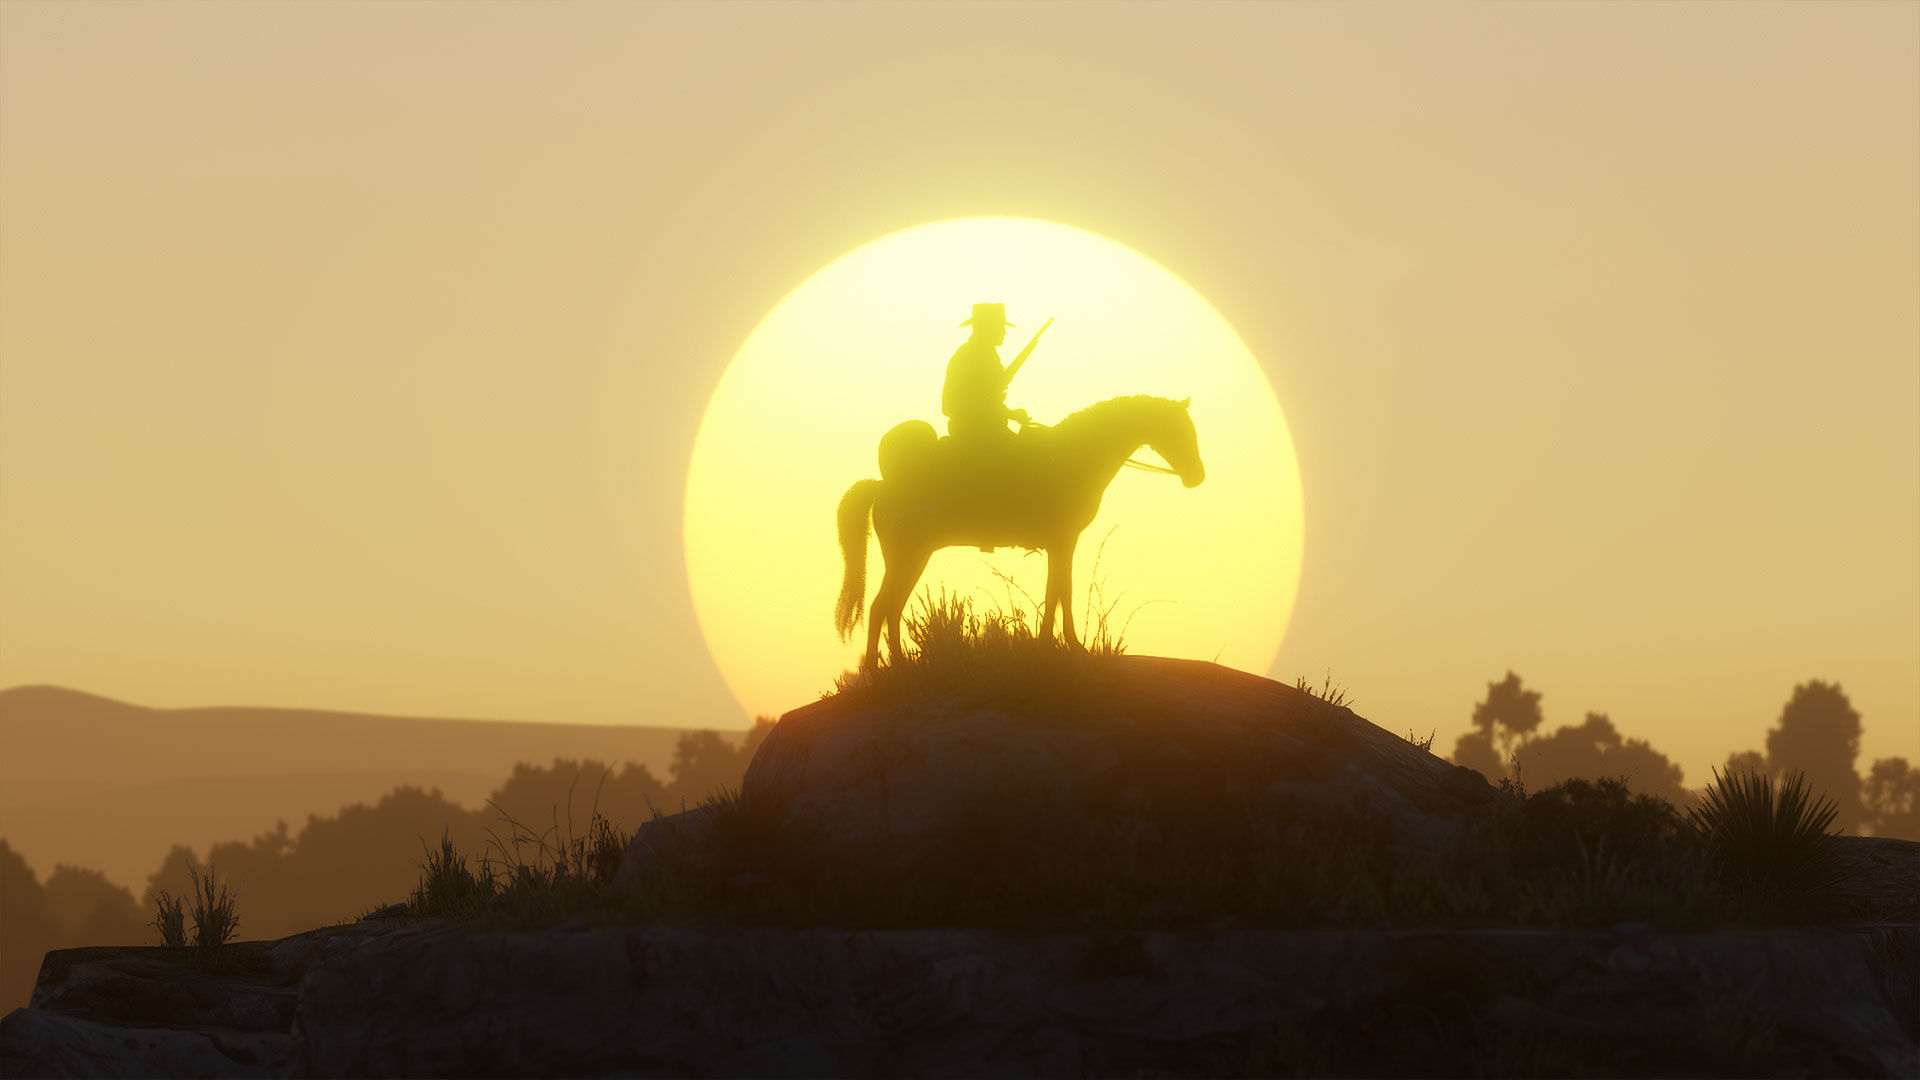 Red Dead Redemption 2 review: “When the credits roll, you'll created enough incredible memories to fill ten lesser games” GamesRadar+